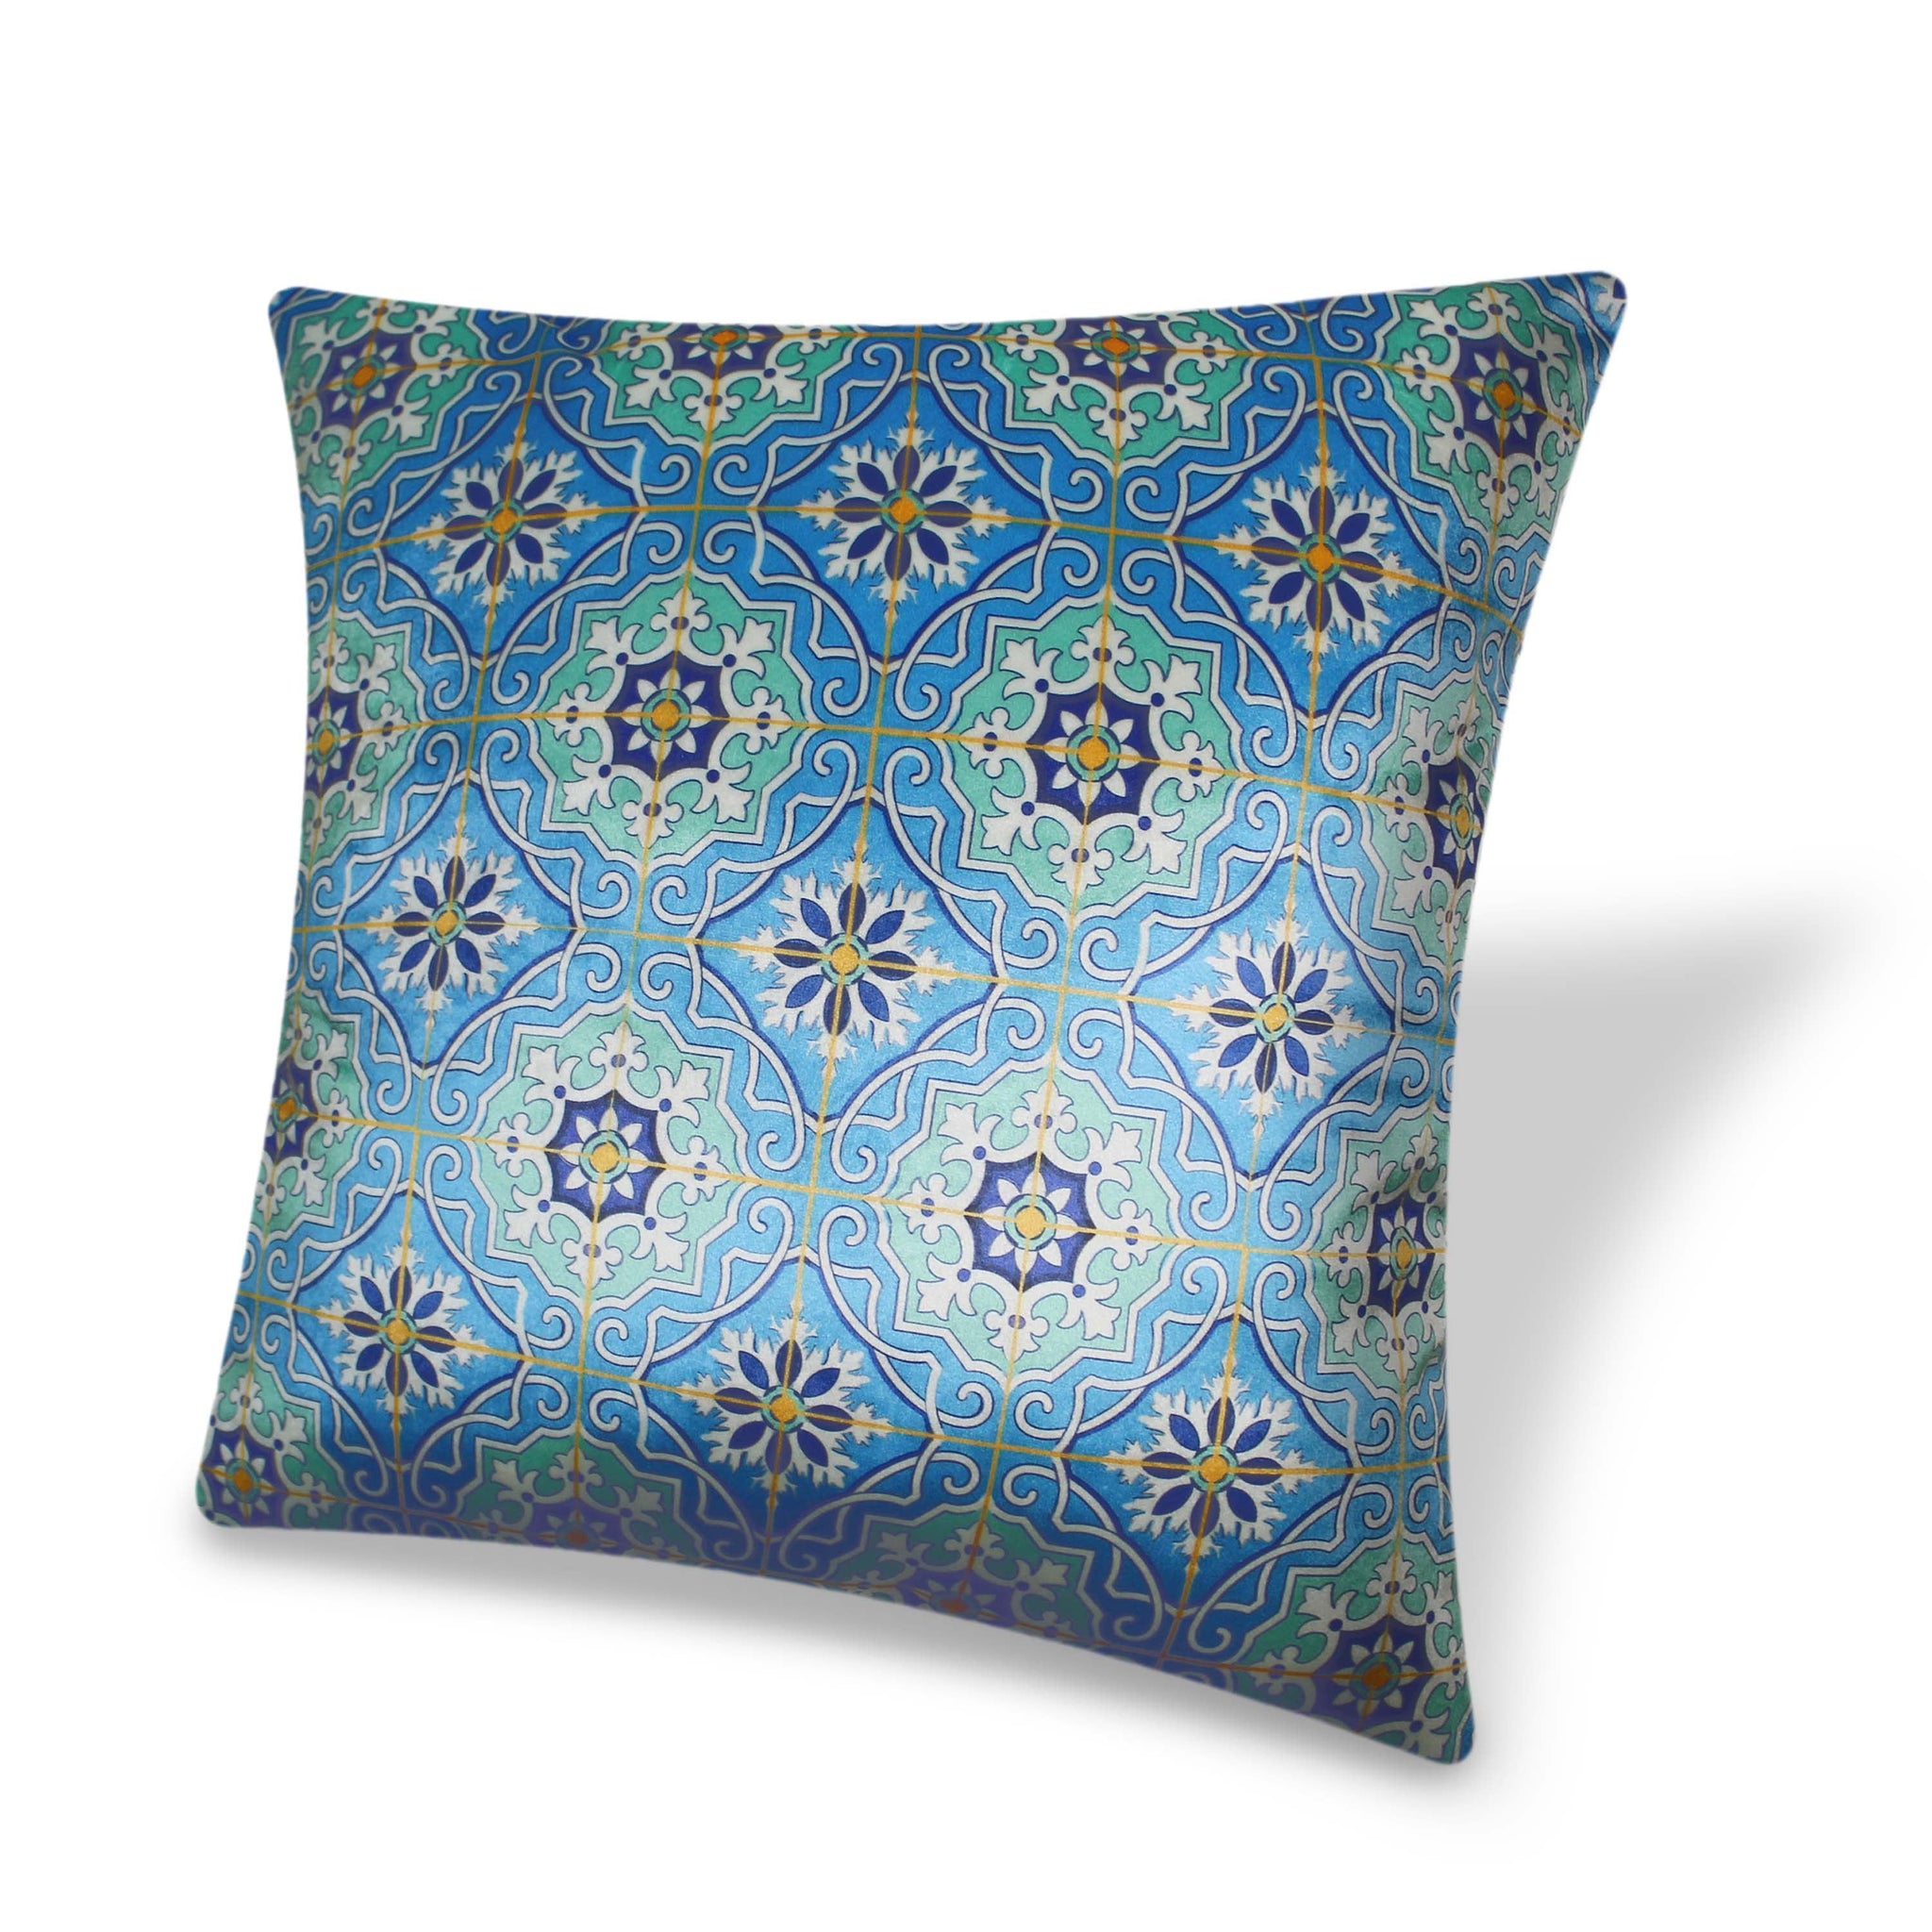 Blue Velvet Cushion Cover Traditional Moroccan Tile Decorative Pillowcase Vintage Home Décor Throw Pillow for Sofa Chair Couch Bedroom 45x45 cm 18x18 In